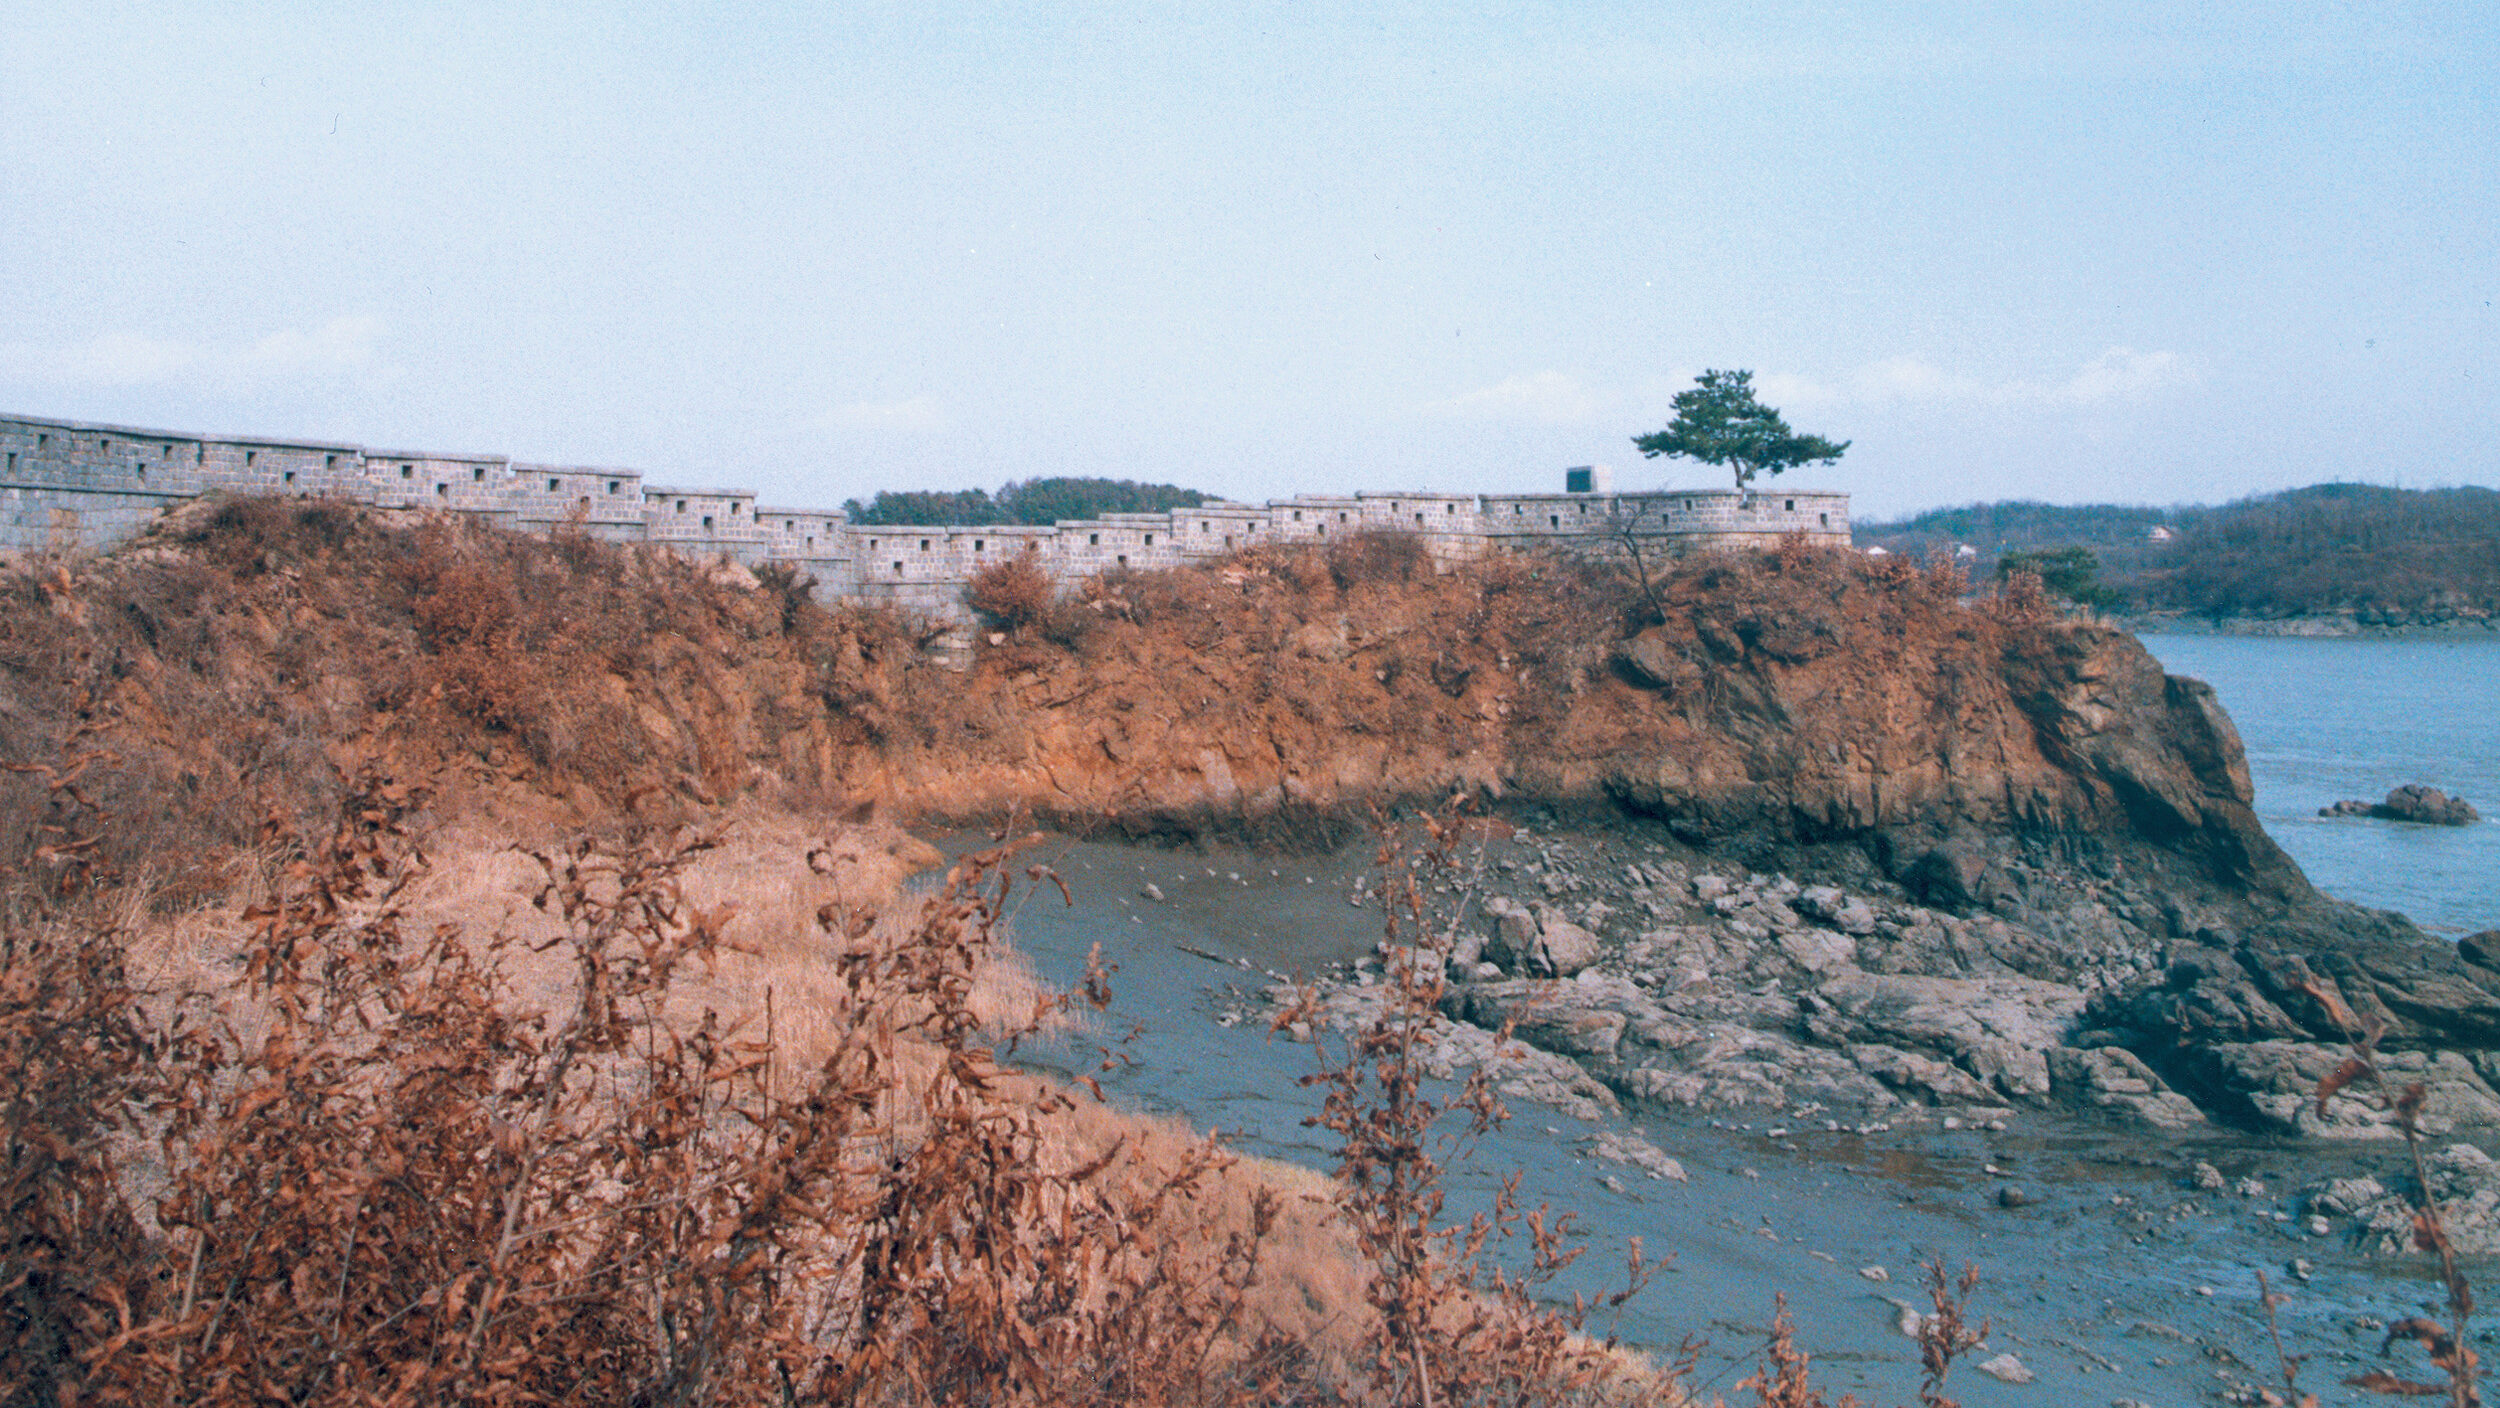 The Yong-do-Dondae, or Dragon’s Head Fort, rose from a promontory at a turn in the river. Cannon were hidden behind the portals.